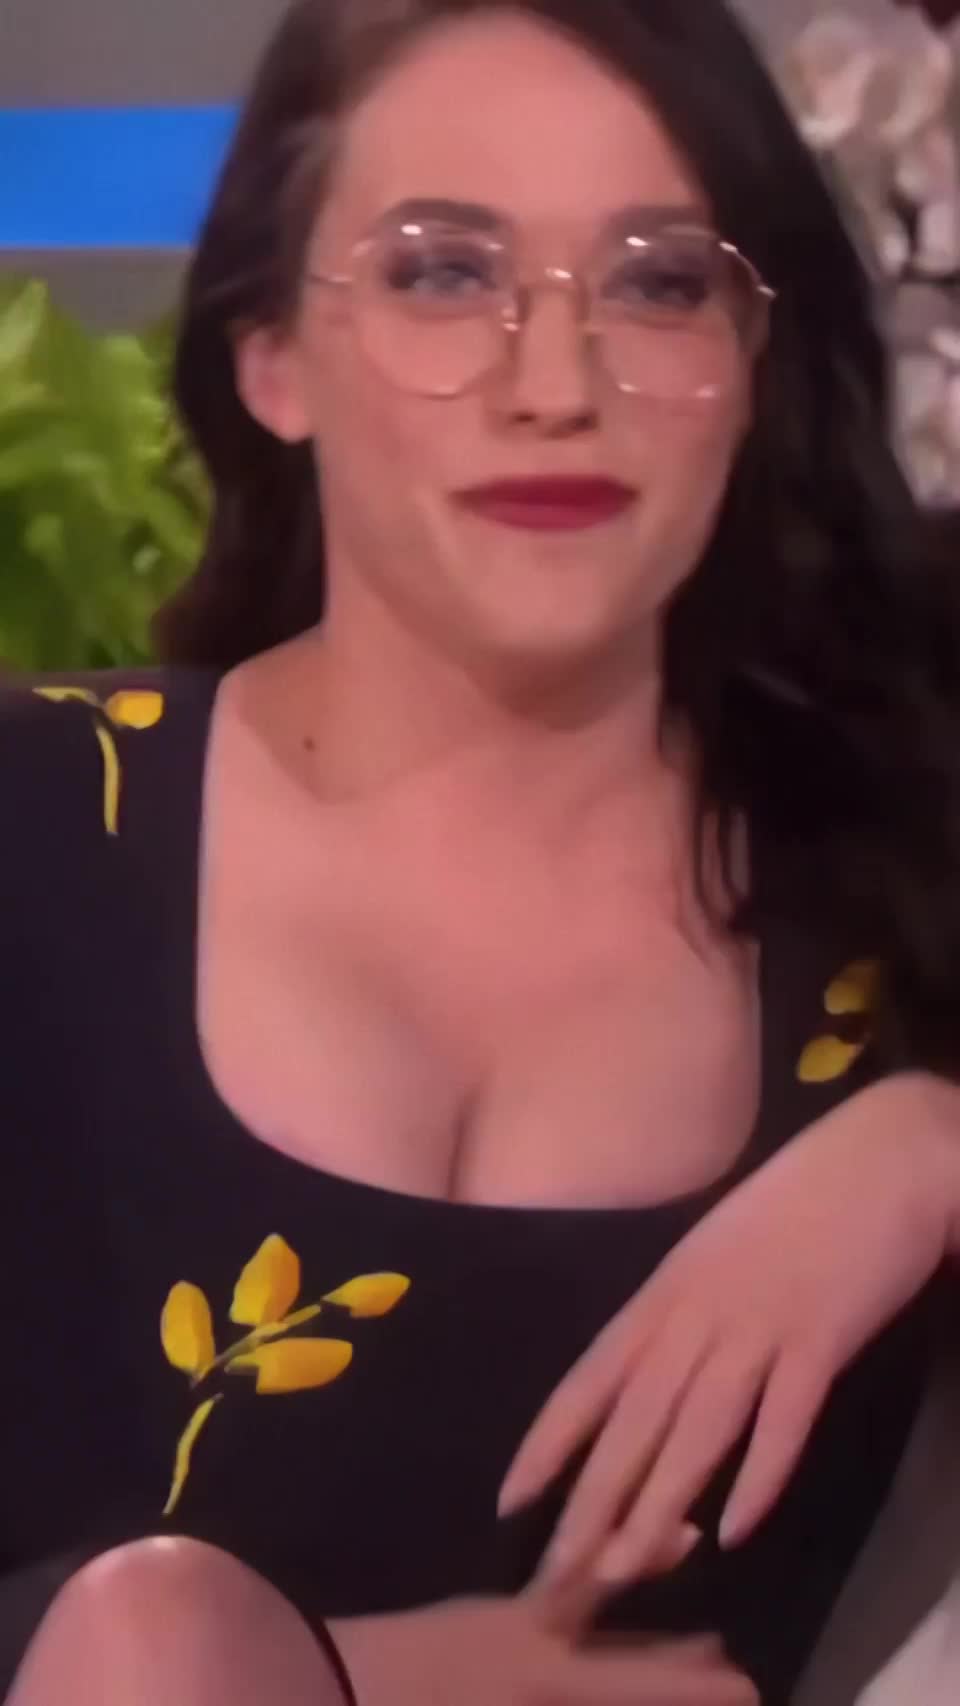 Imagine a titjob from Kat Dennings and her massive tits